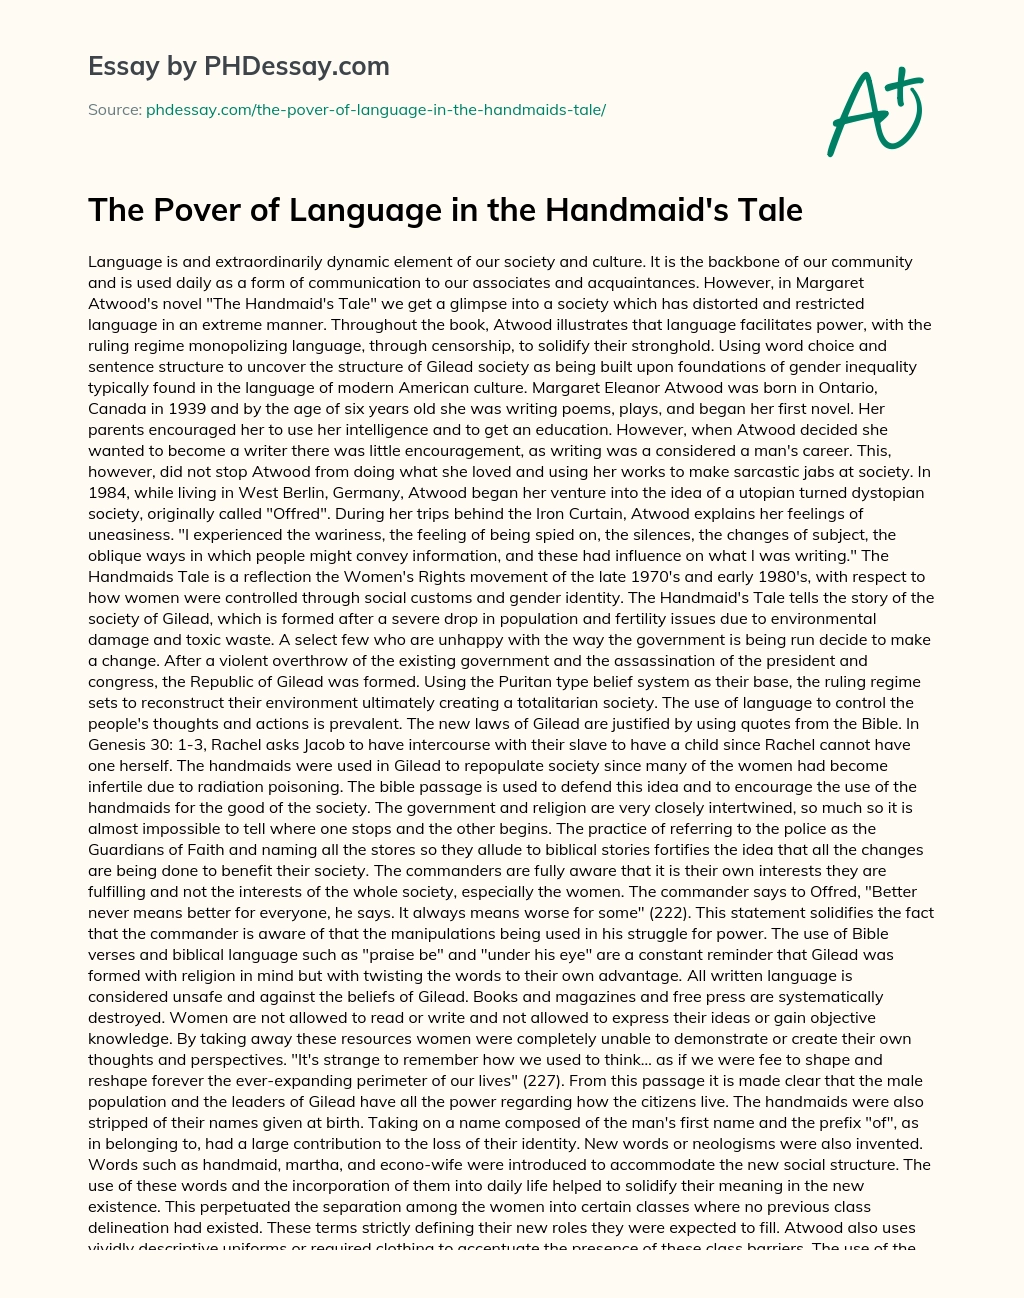 The Pover of Language in the Handmaid’s Tale essay